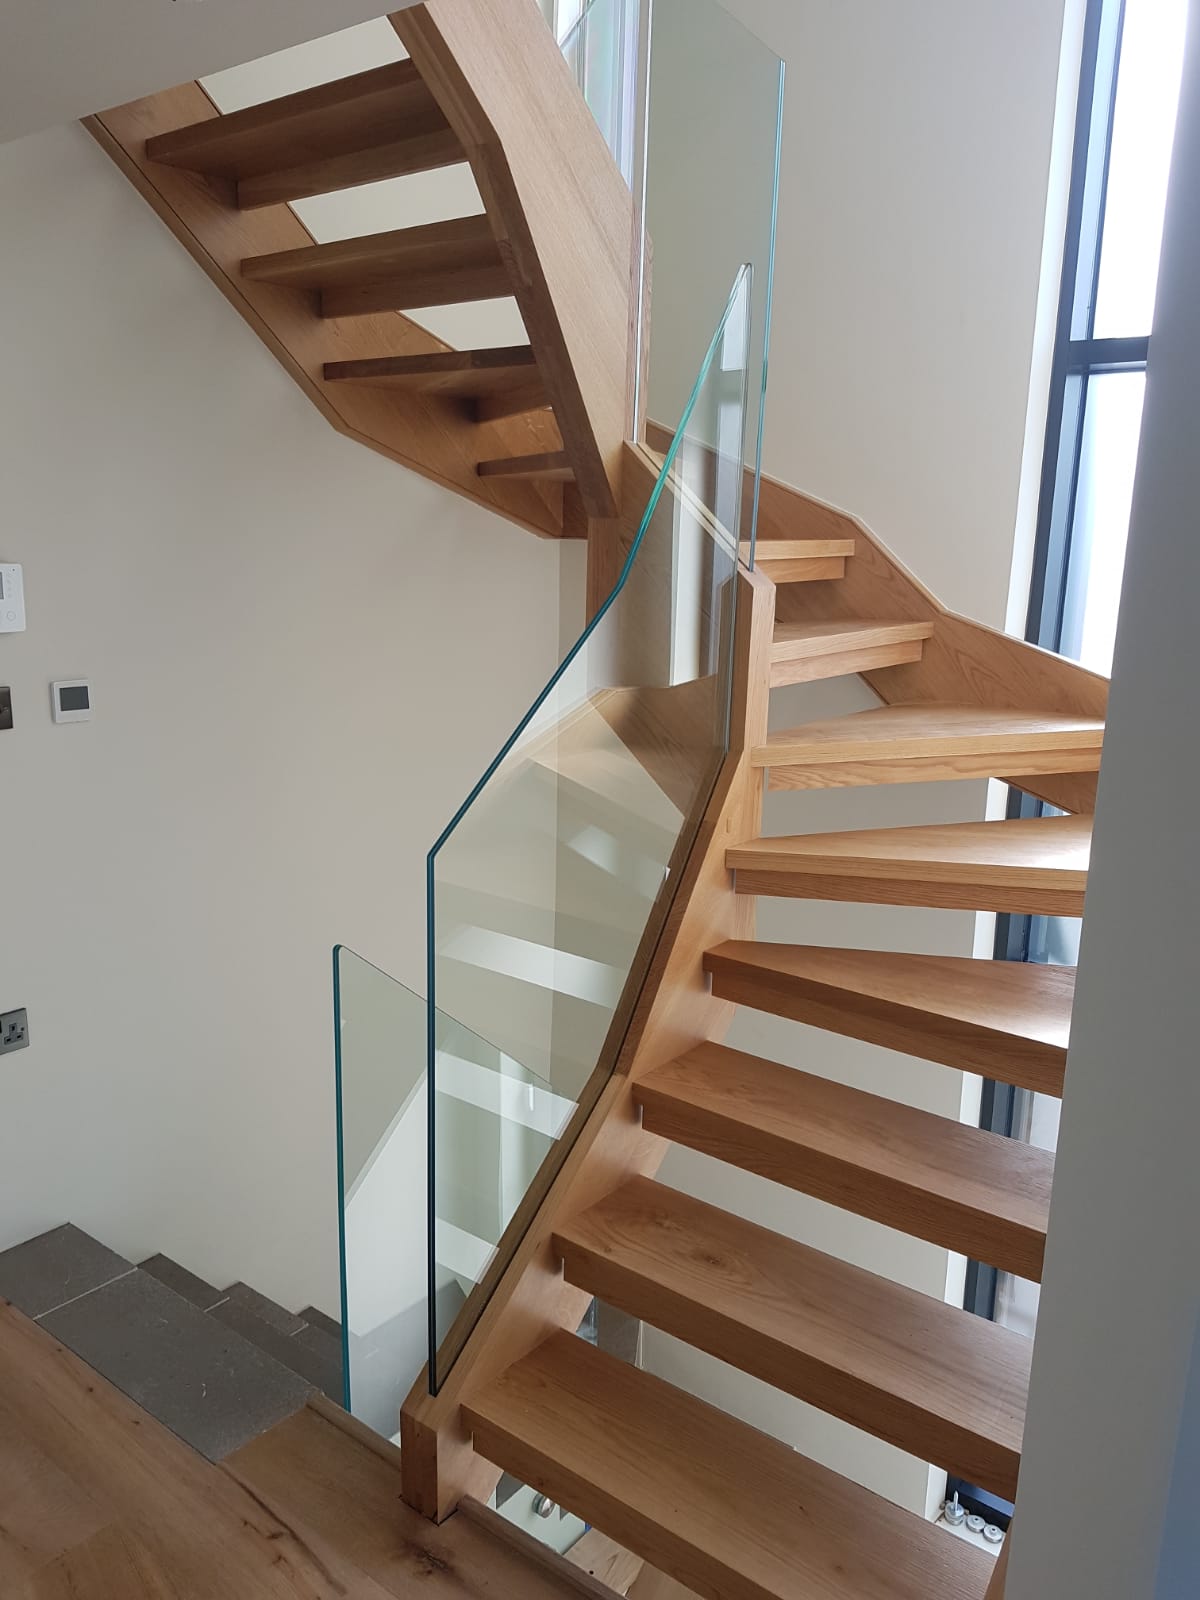 3 open Tread Staircases